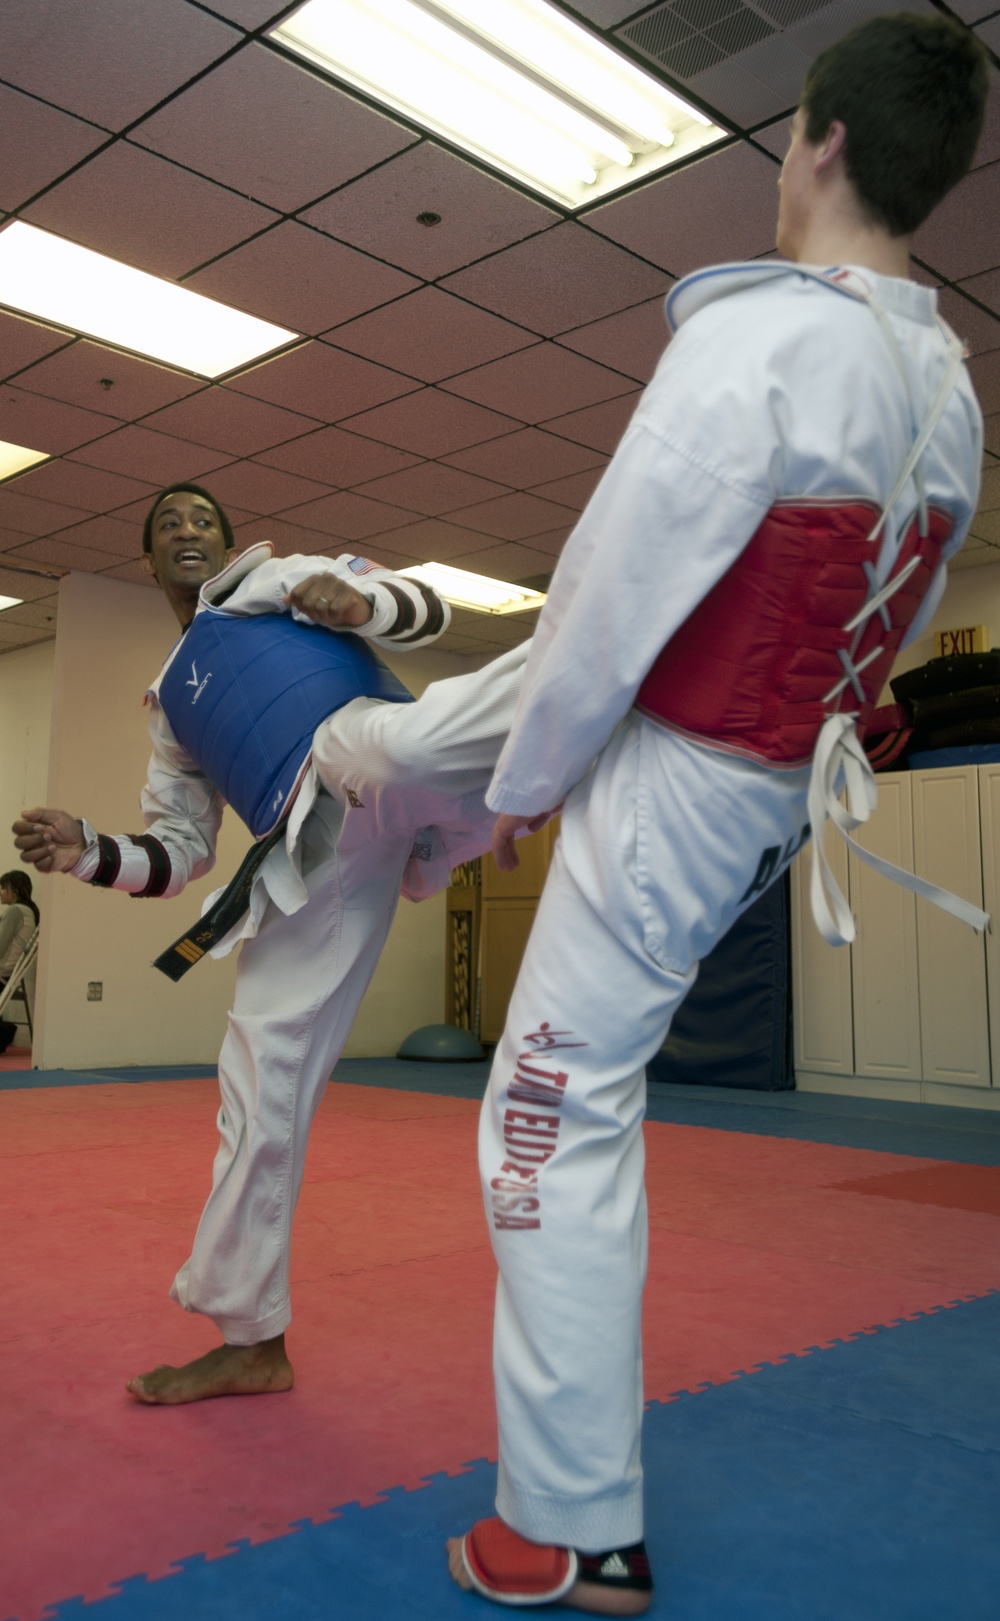 Representing Air Force and country through martial arts